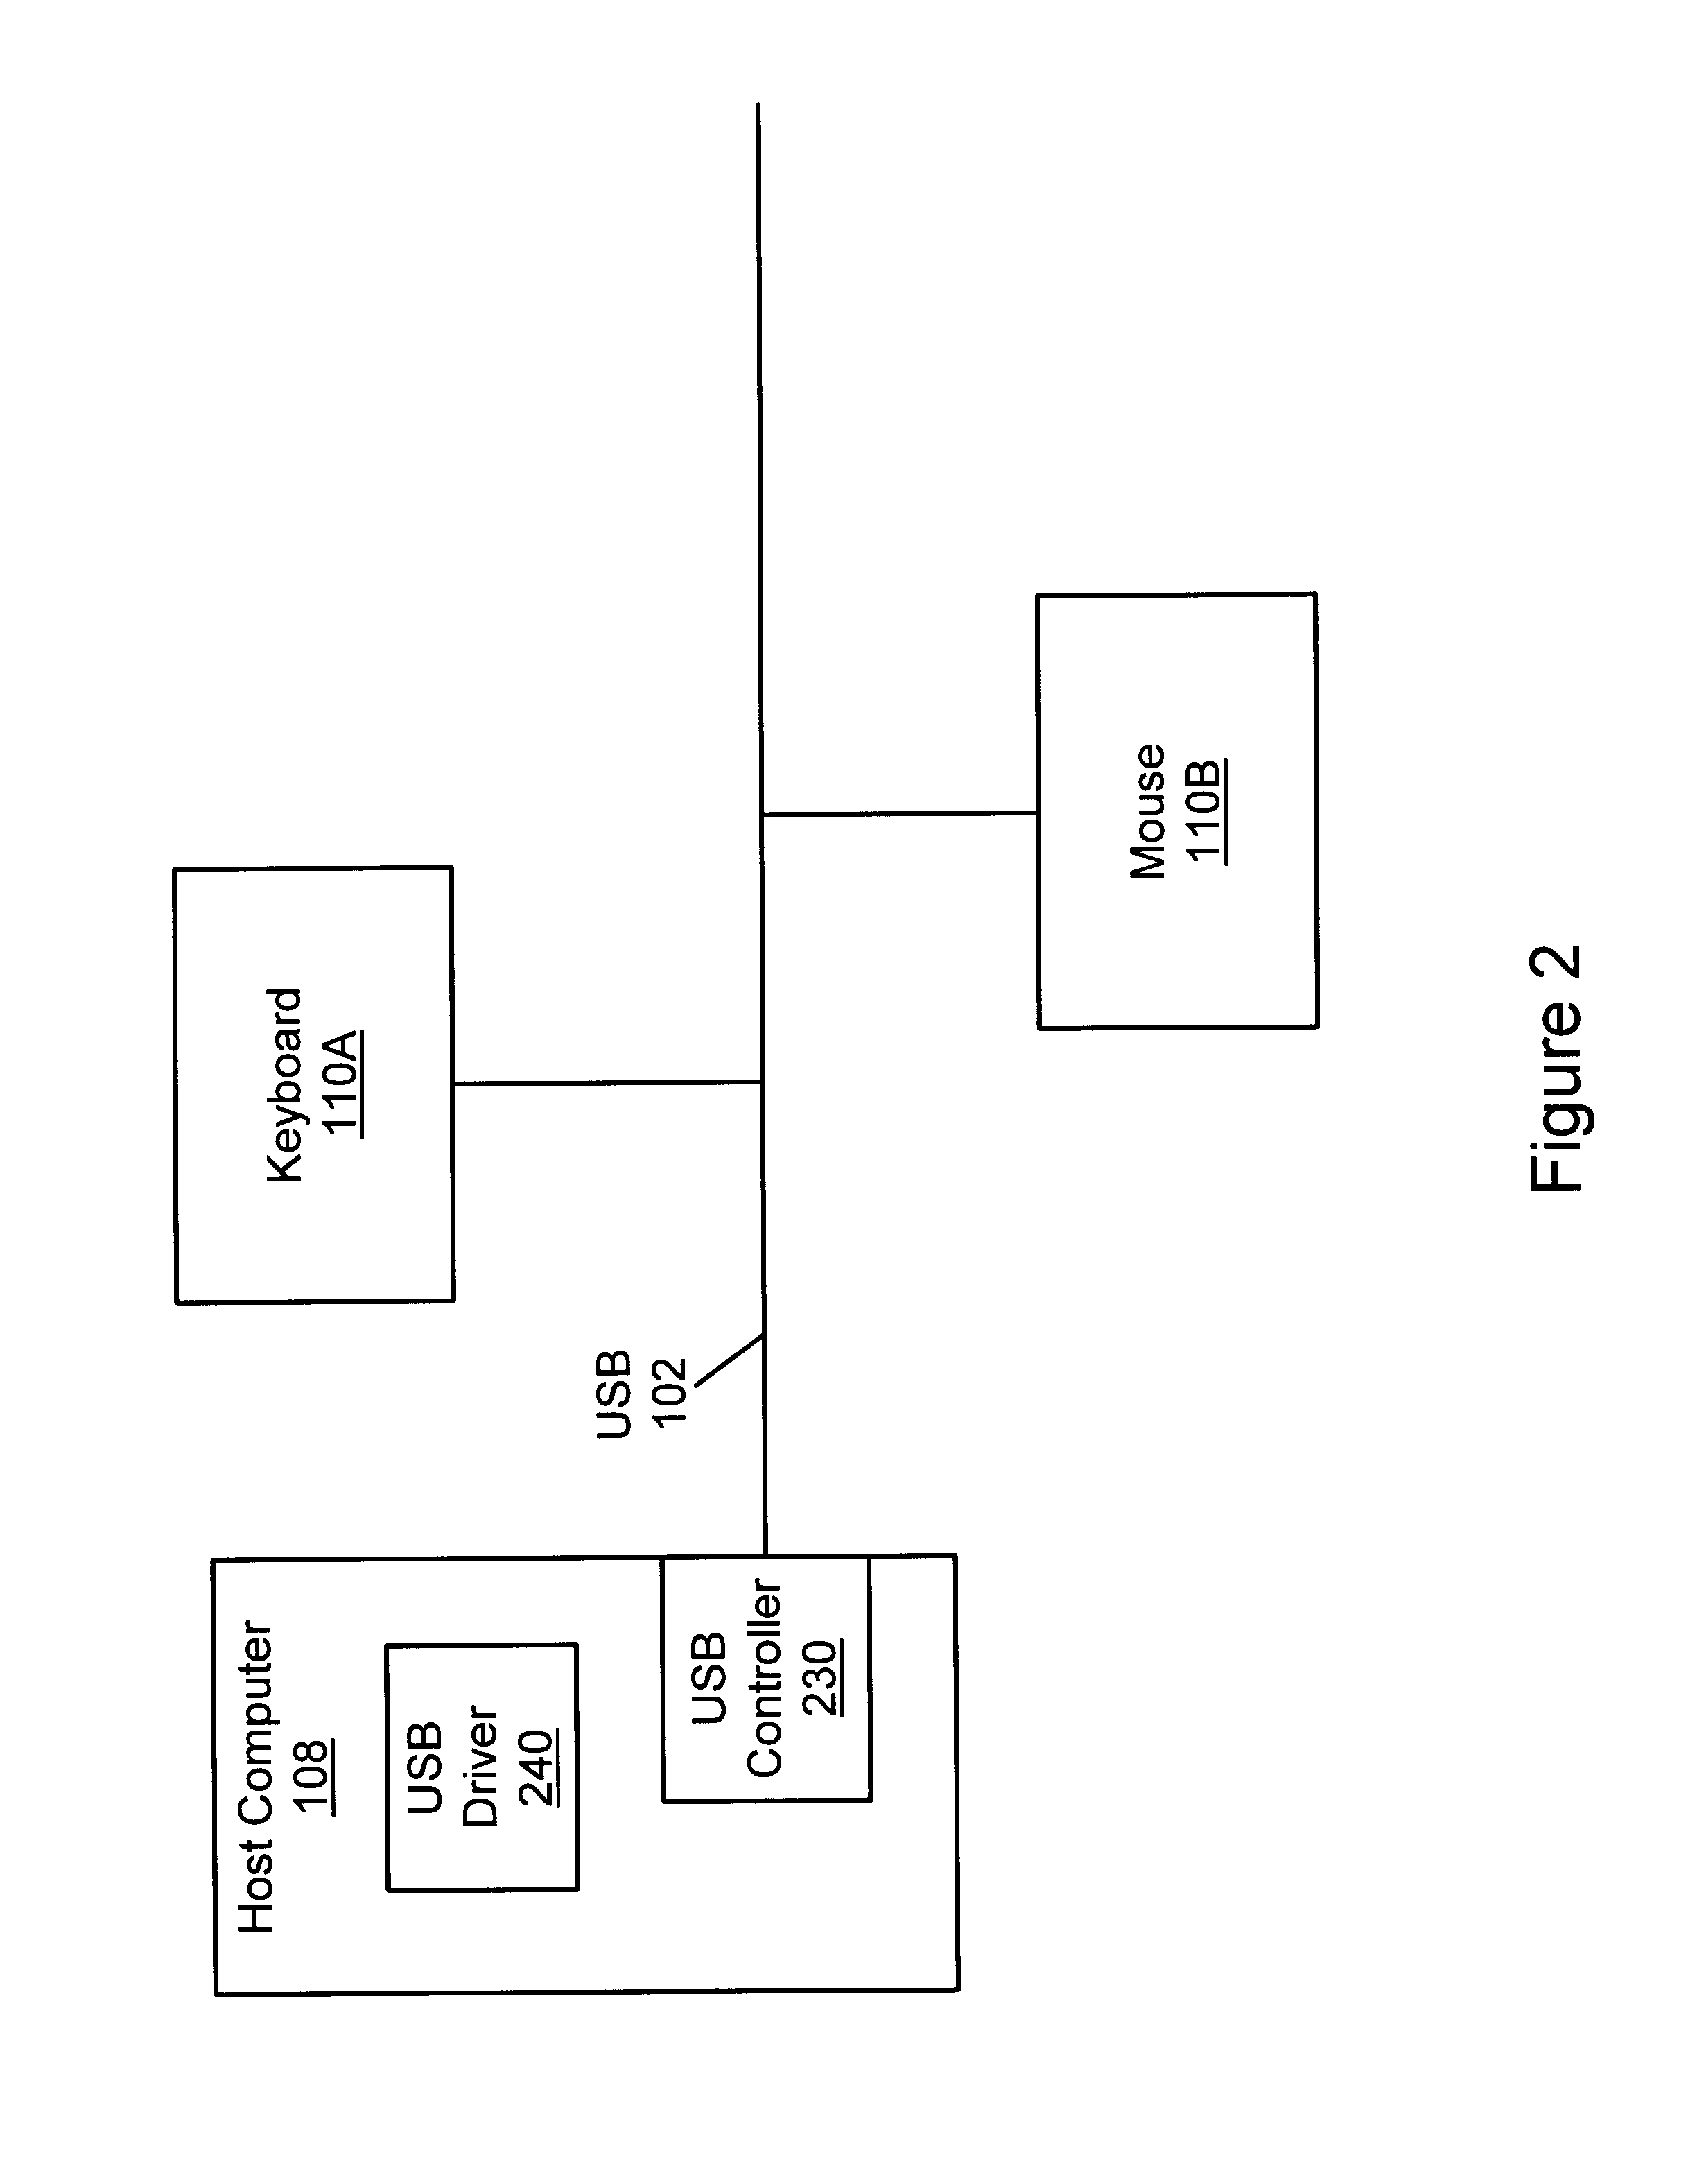 System and method for combining computer video and remote universal serial bus in an extended cable